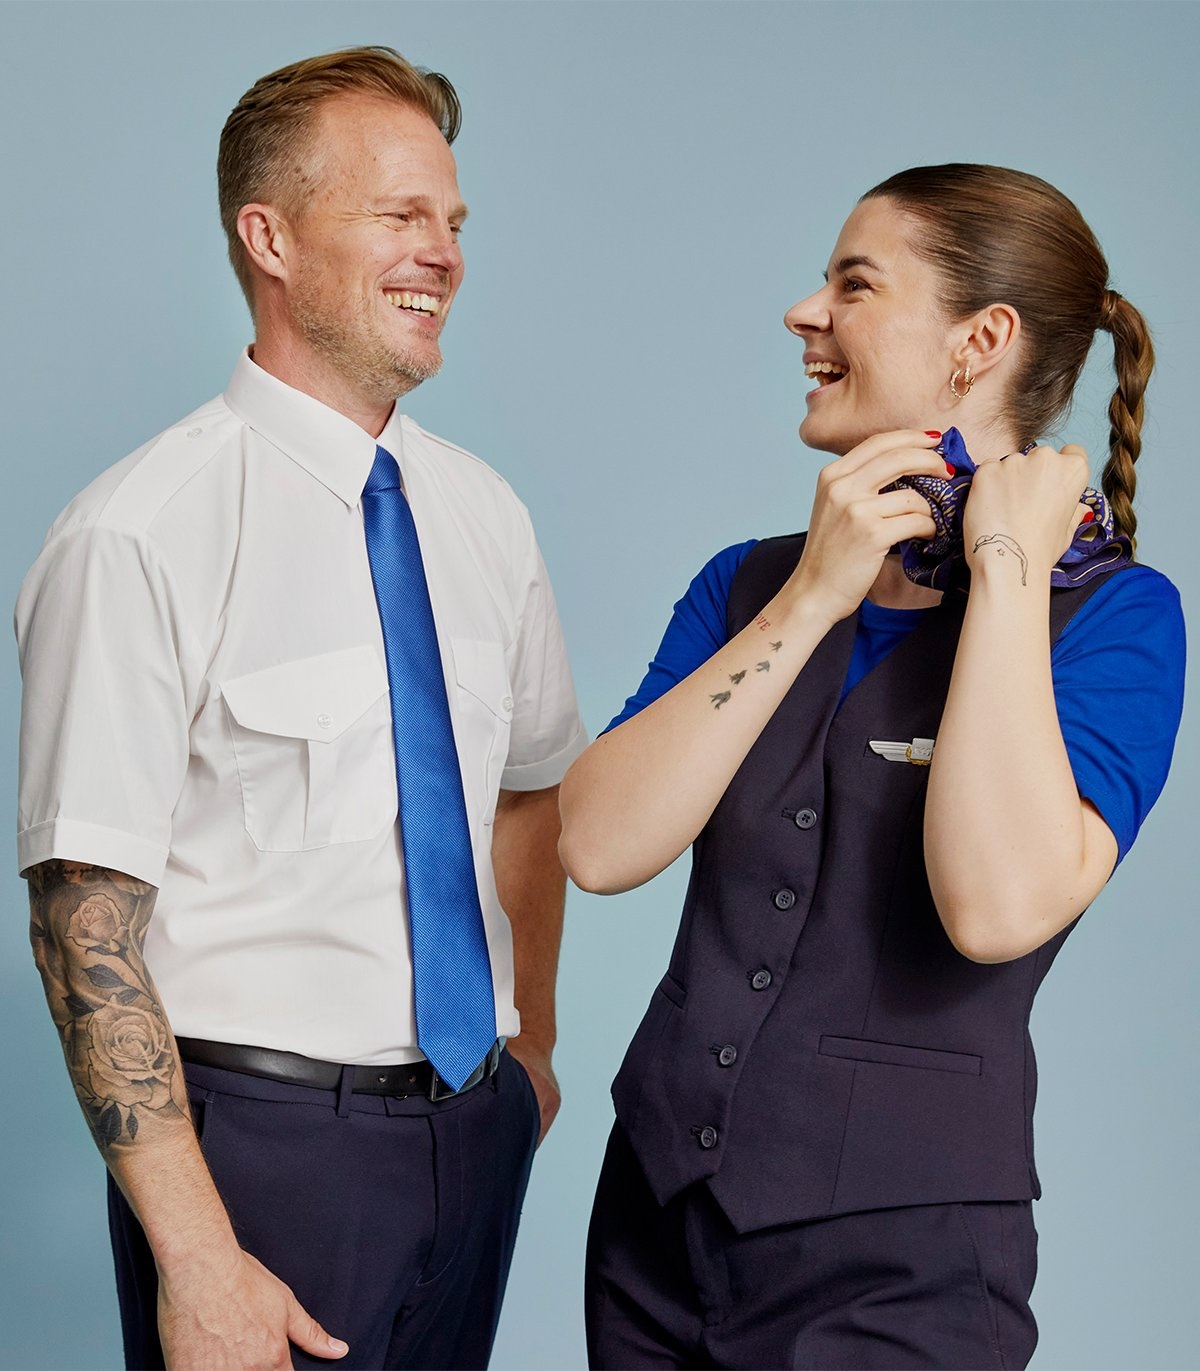 SAS Relaxes Dress Code: Flight Crew Can Wear Sneakers and Show Tattoos